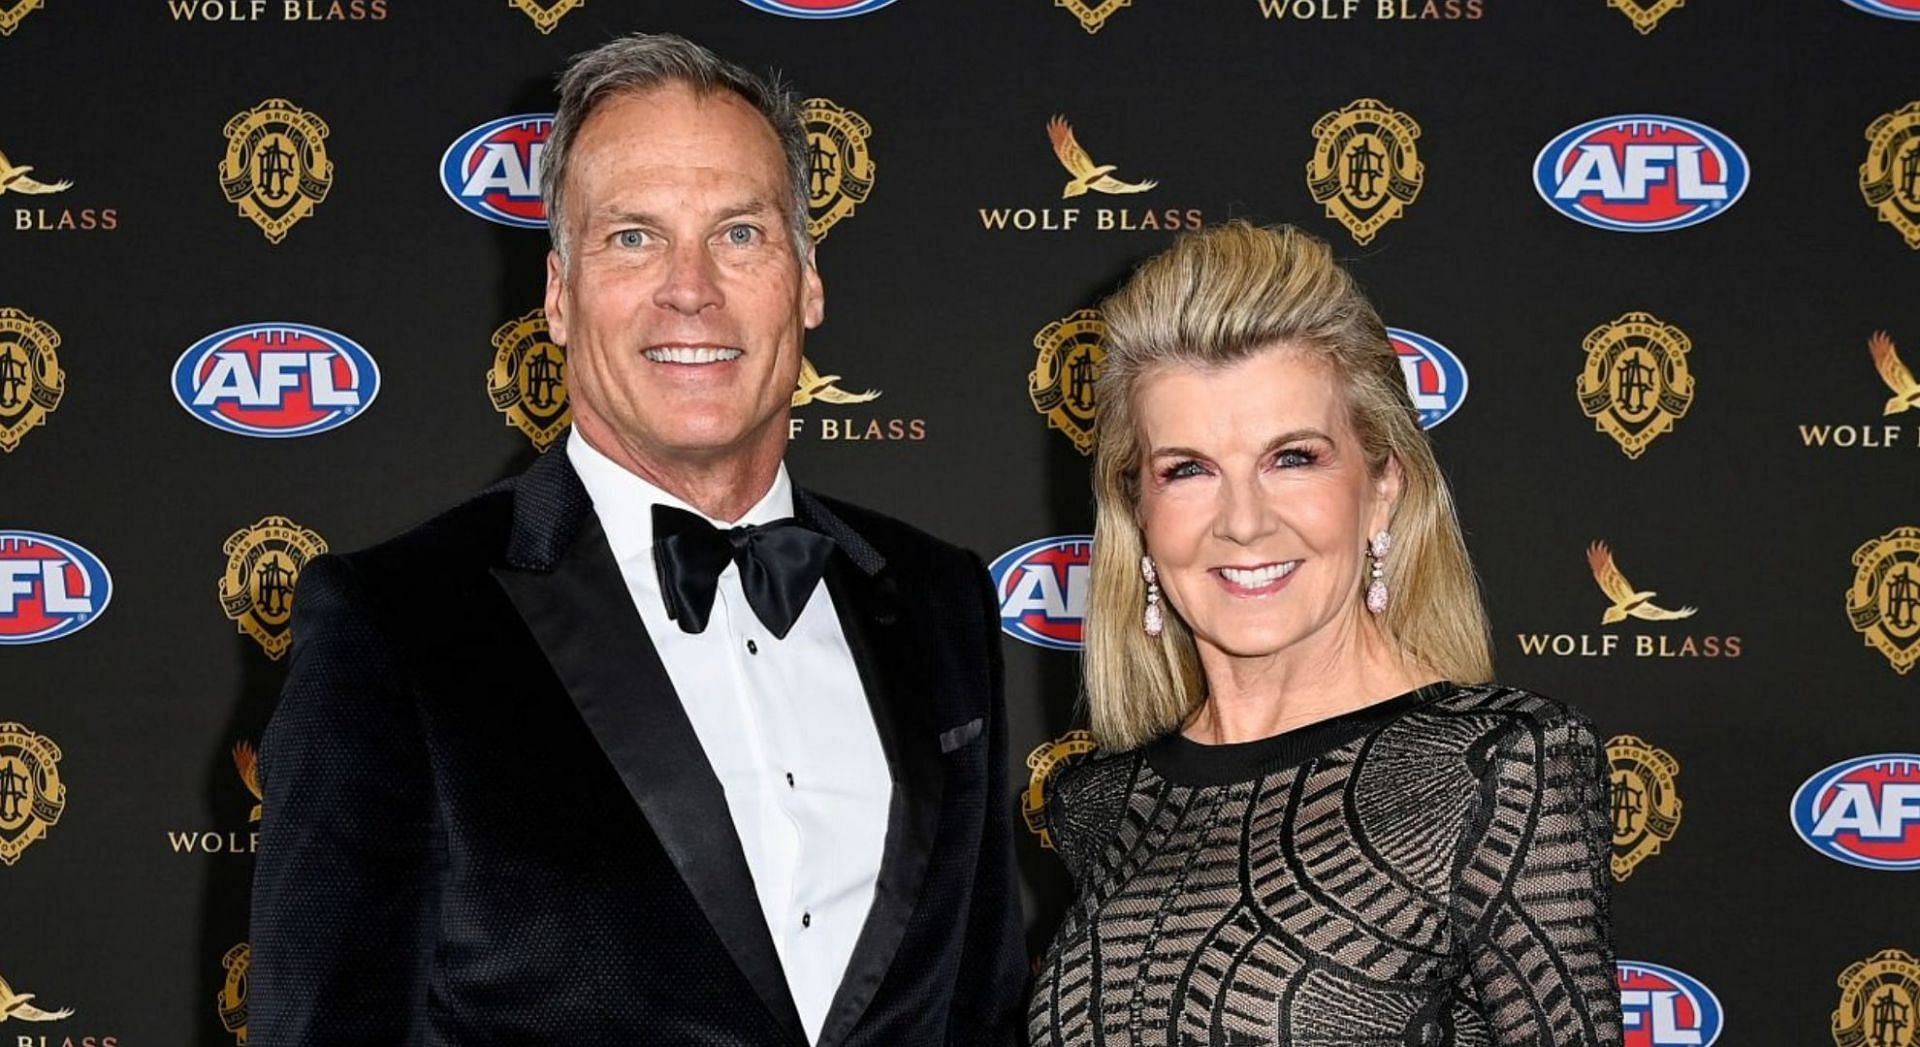 Julie Bishop has reportedly parted ways with her longtime boyfriend David Panton (Image via Getty Images)